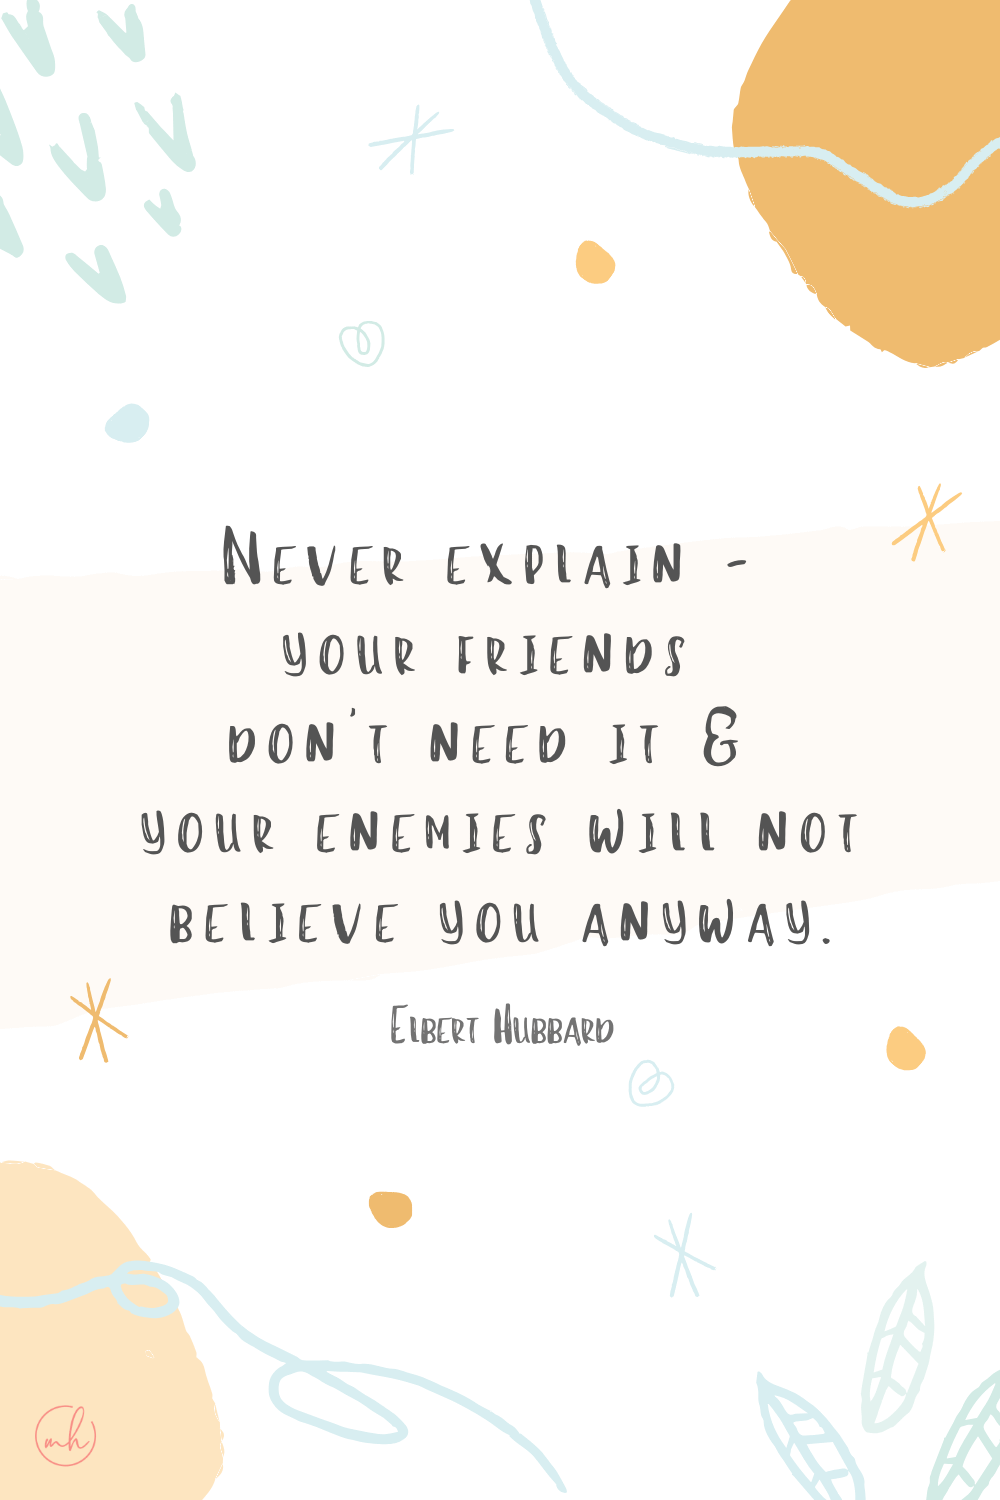 “Never explain - your friends do not need it and your enemies will not believe you anyway.” - Elbert Hubbard